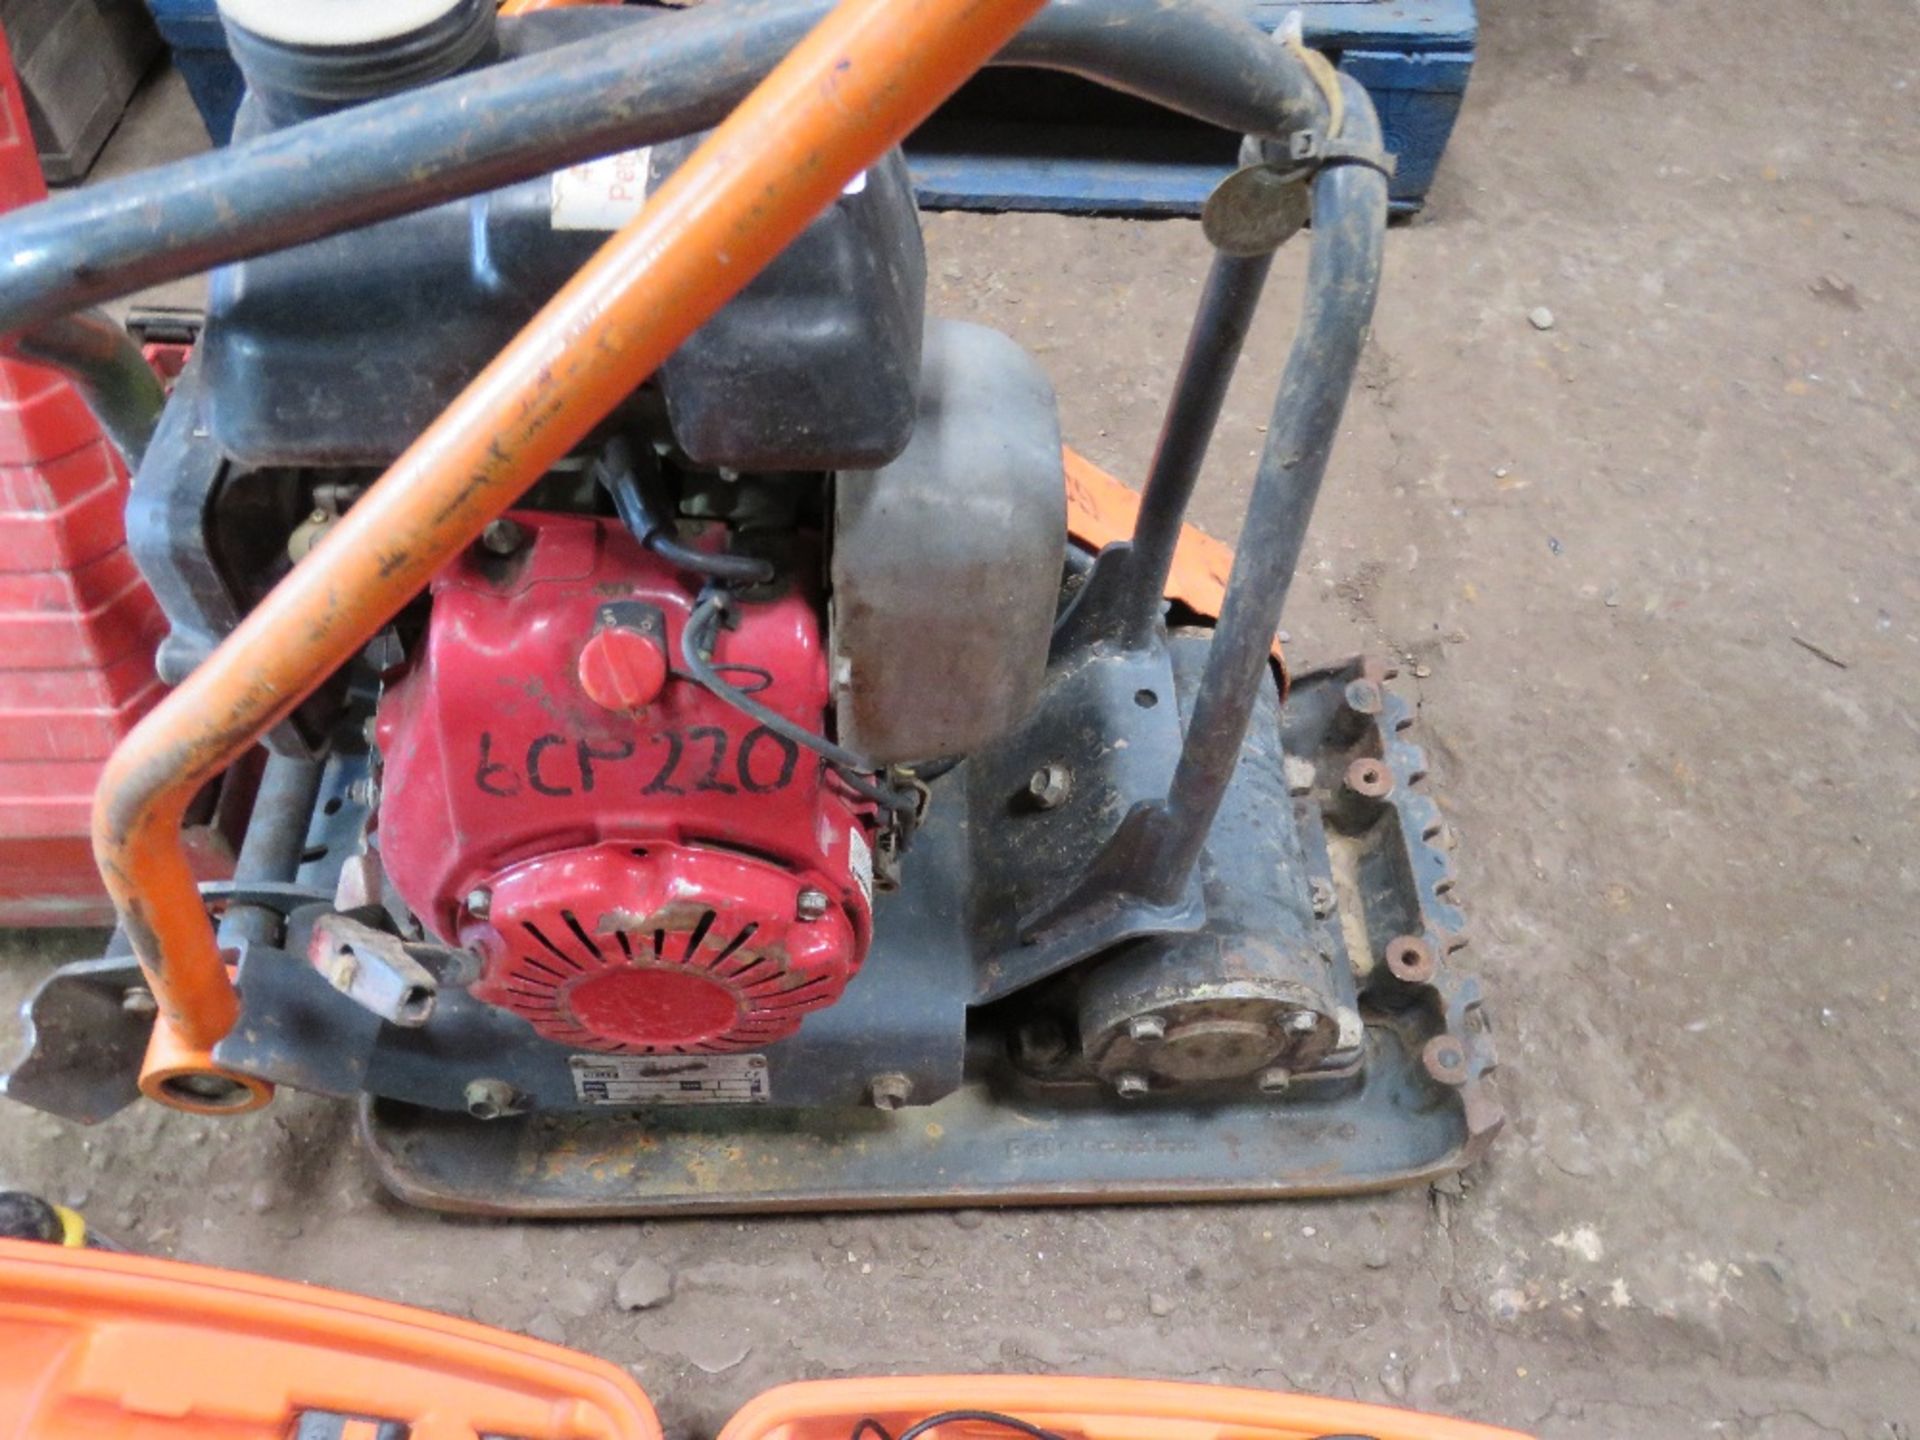 BELLE LC3251 PETROL ENGINED COMPACTION PLATE. WHEN TESTED WAS SEEN TO RUN AND VIBRATE.